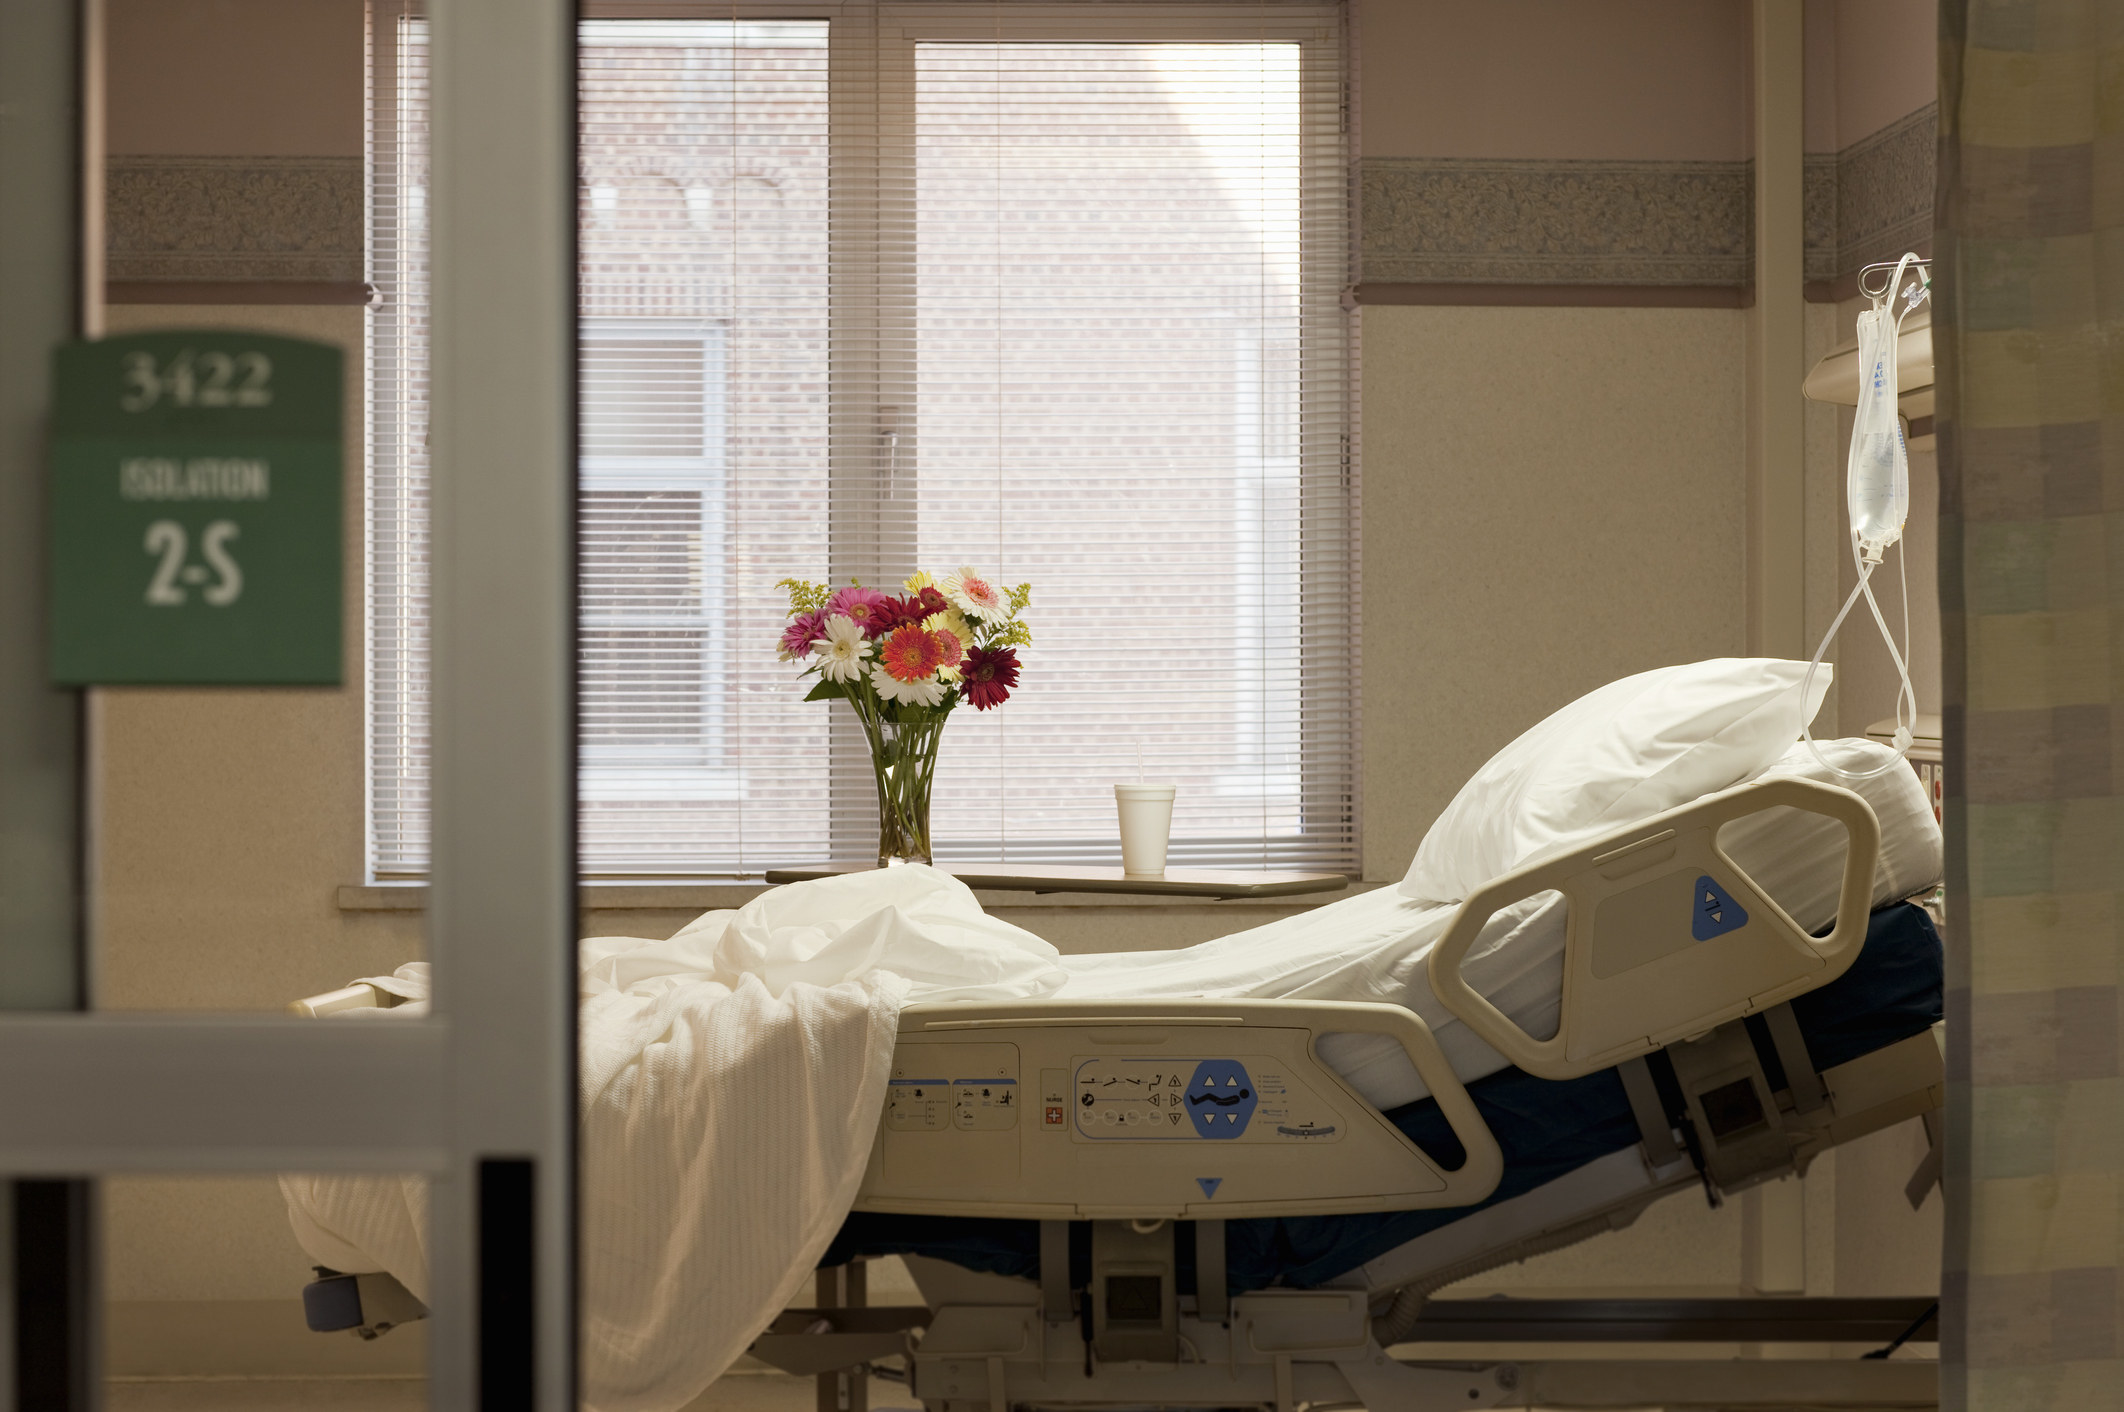 A vacant hospital bed sits in a room